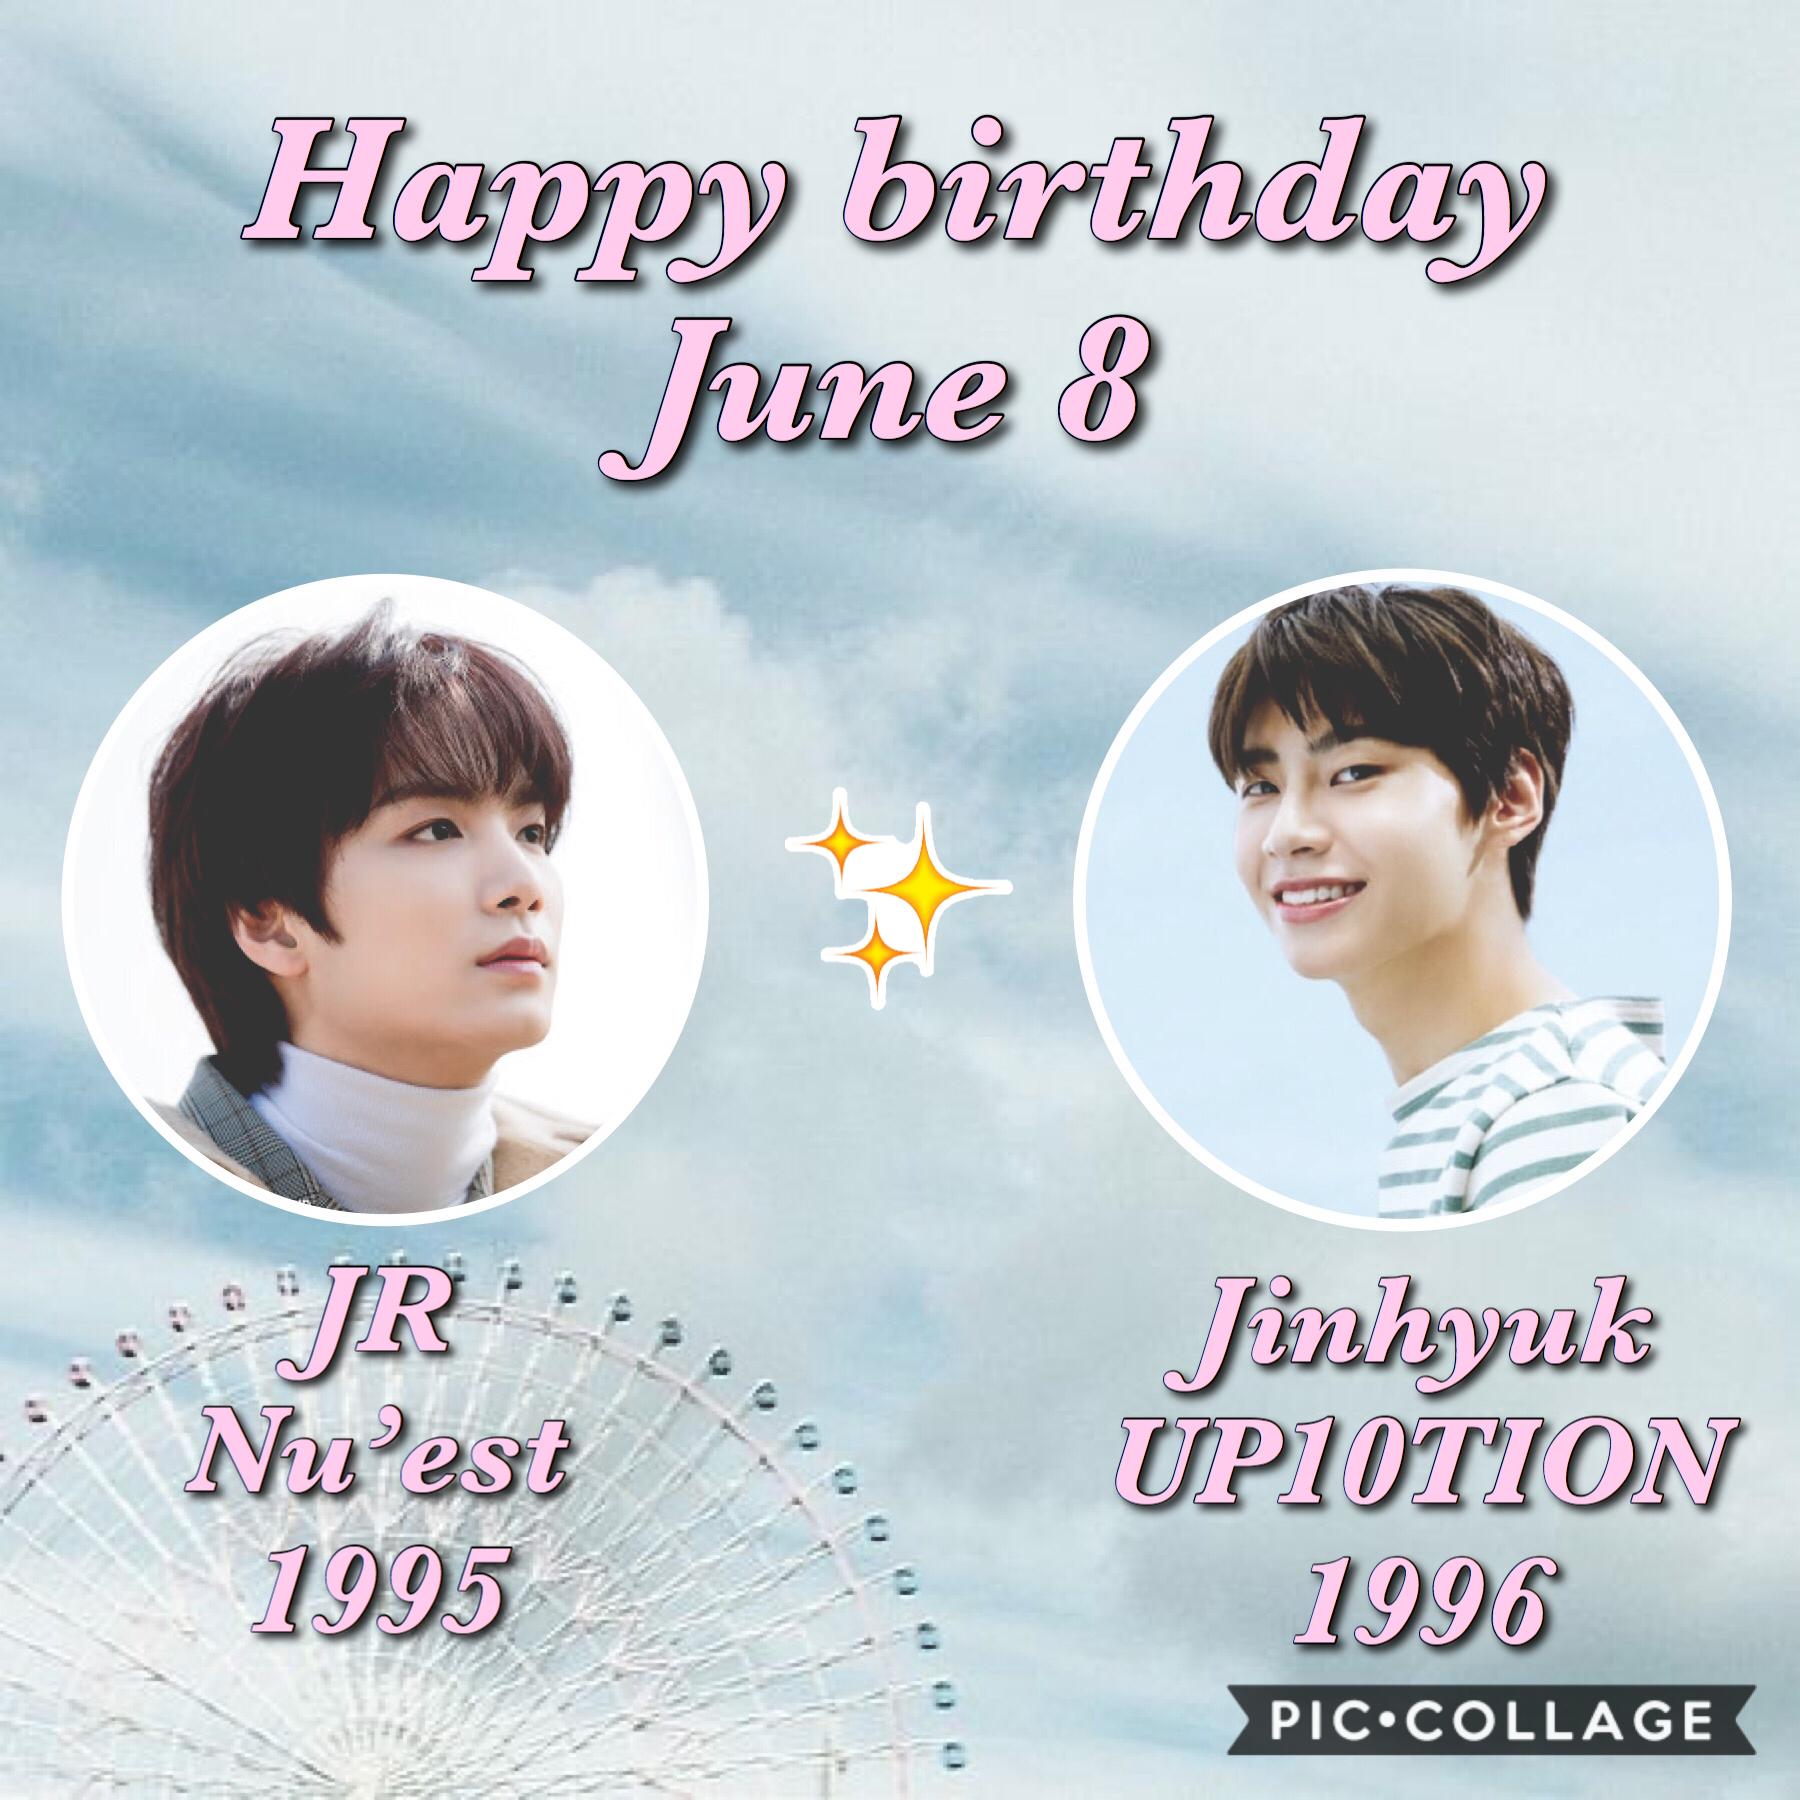 •🌷🌹•
Happy birthday to my kings🥺🥺🥺 very talented rappers and super handsome 😳❣️ They both were on PD101 / PX101 and were robbed of their debut AAAAH. It’s ok, they’re doing amazing now 😌🥰
🌹🌷~Whoop~🌷🌹